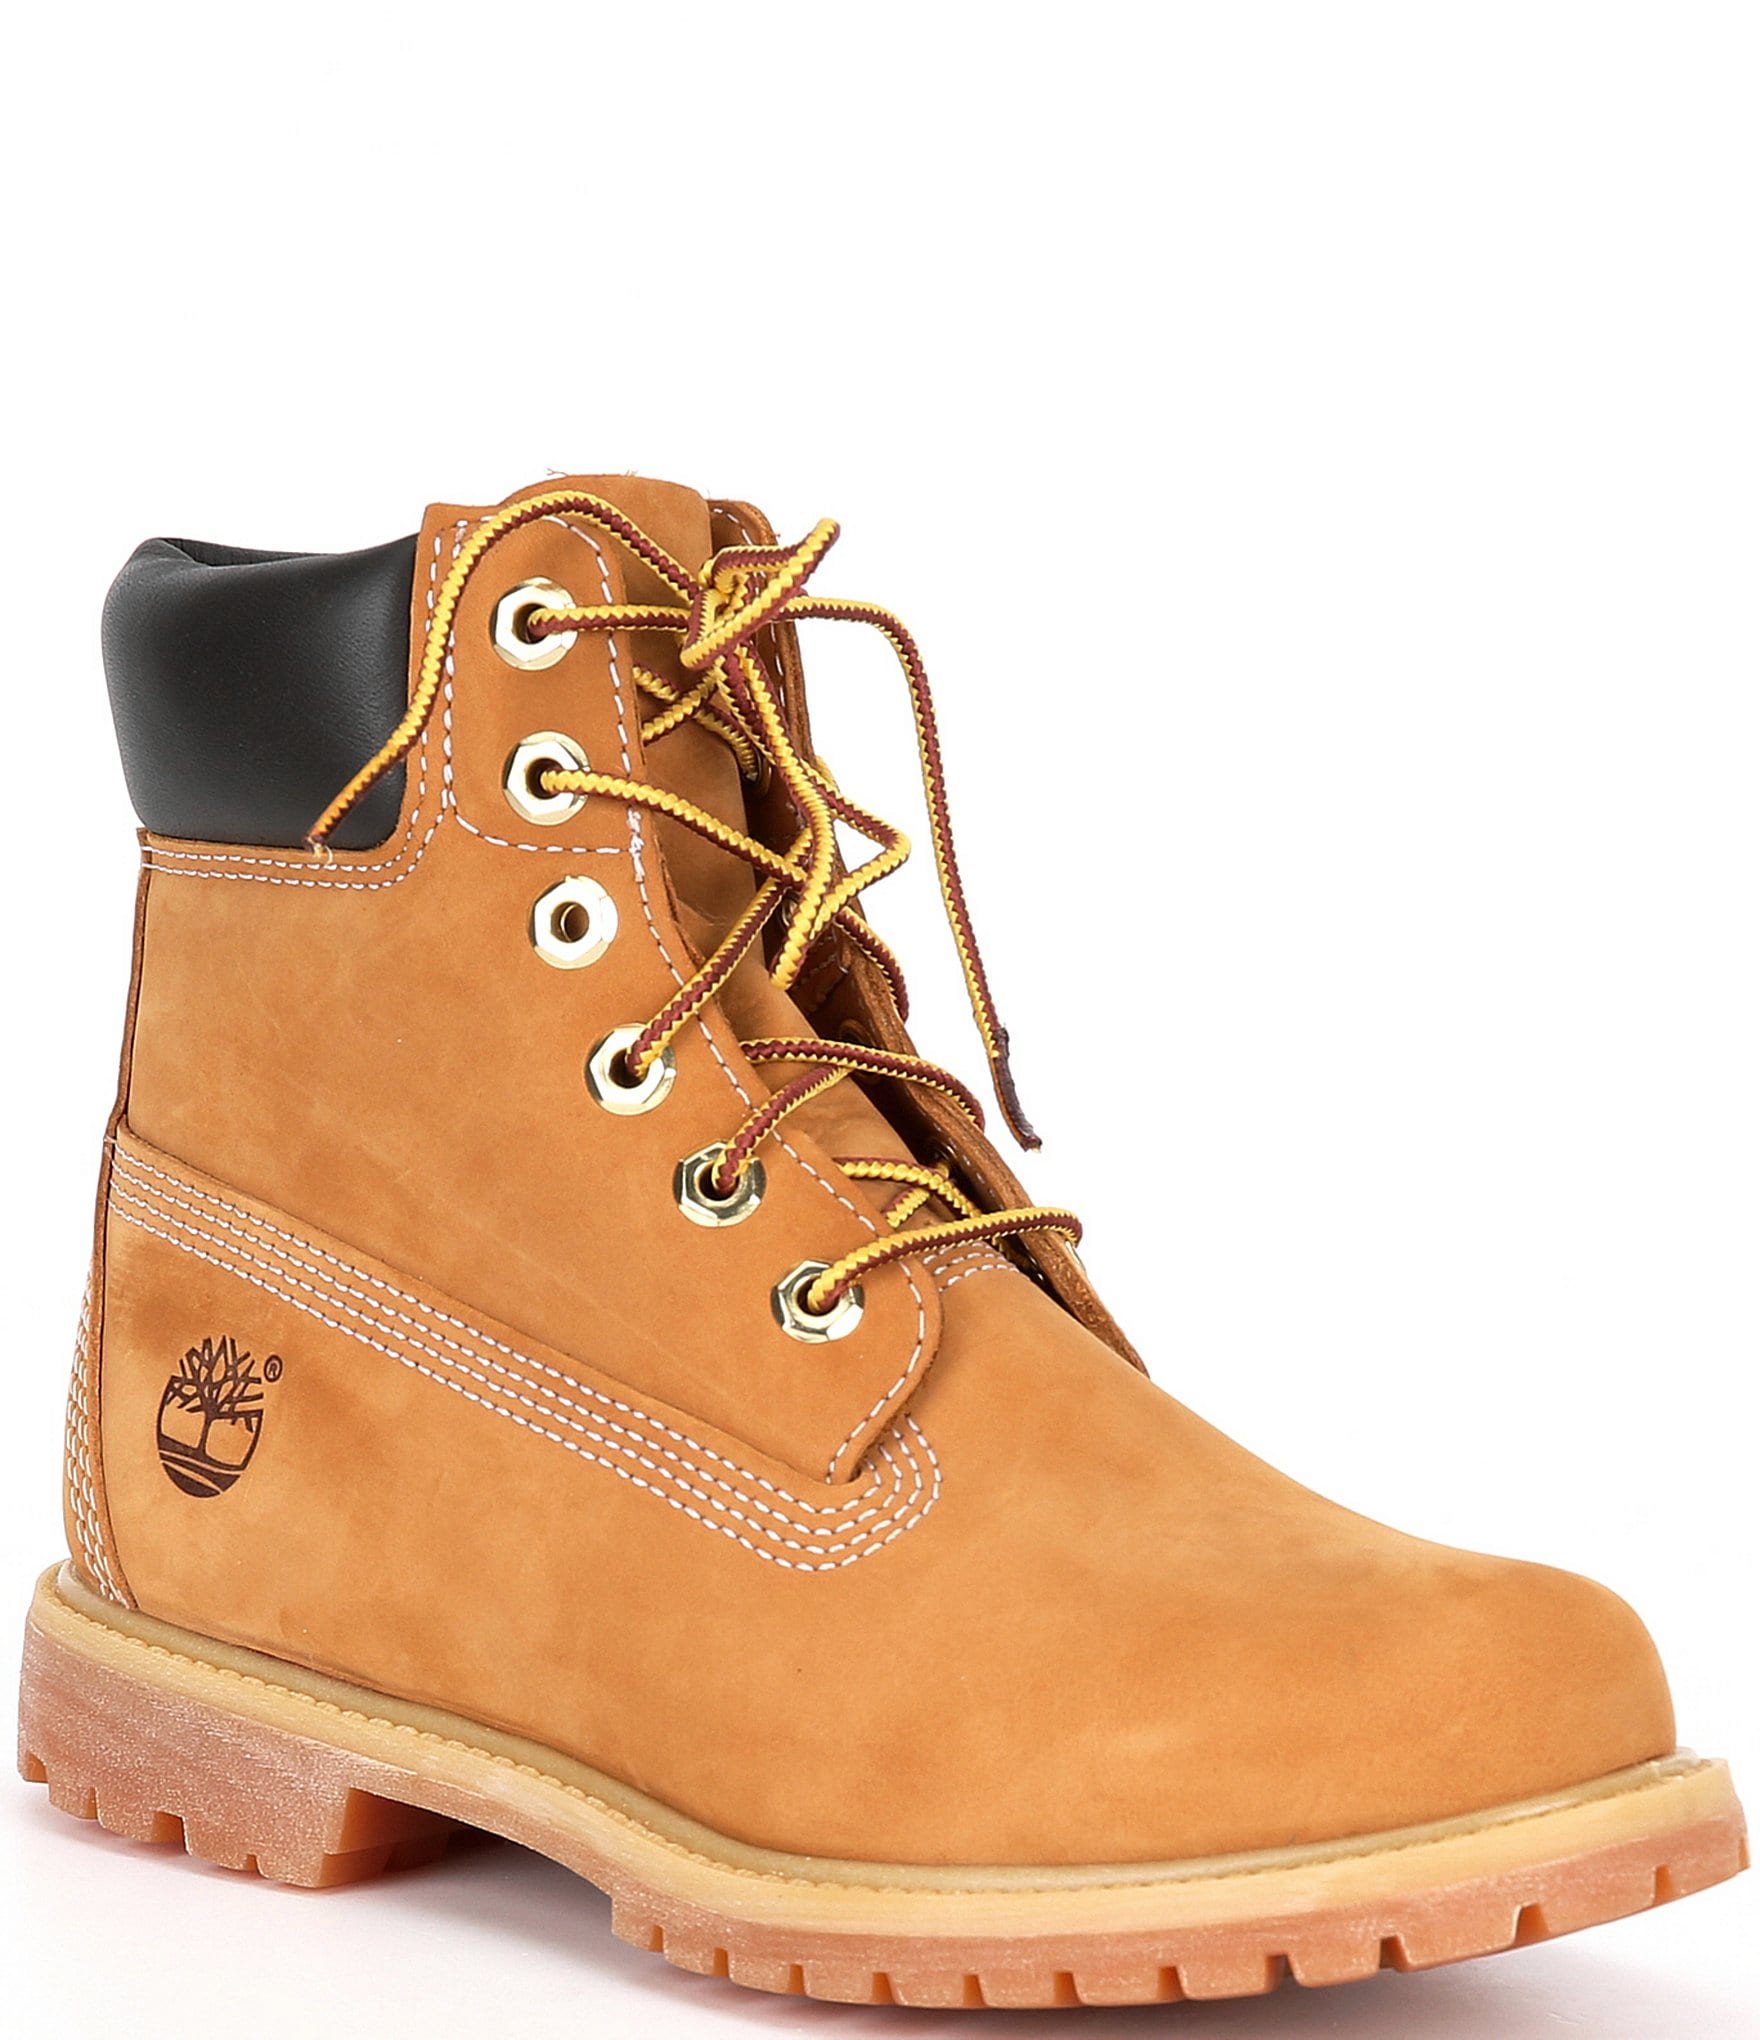 Timberland Women's Wide Width Shoes 